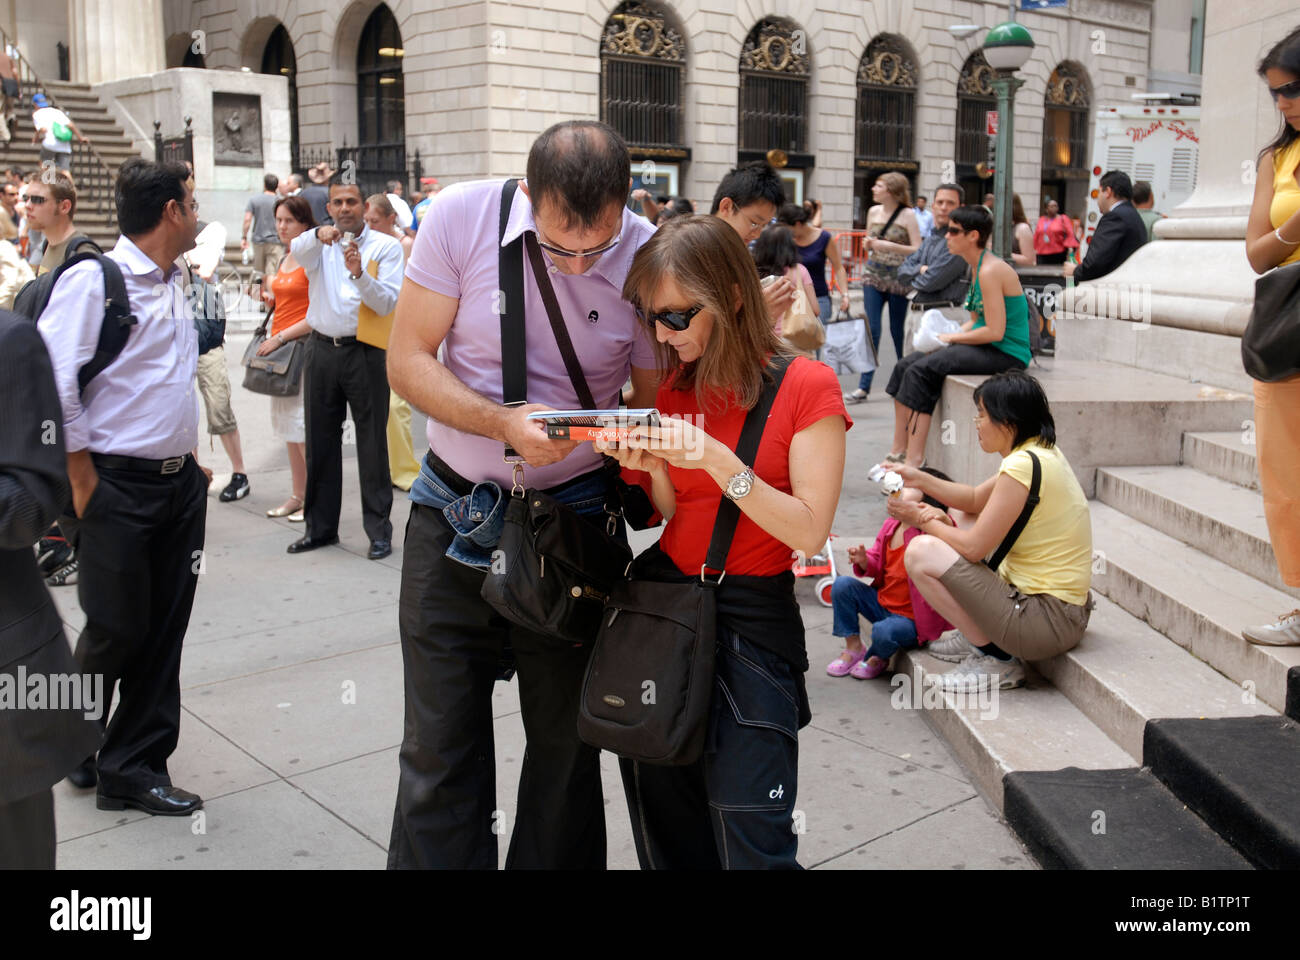 Tourists consult a guide book ion Wall Street in front of the New York Stock Exchange in New York Stock Photo